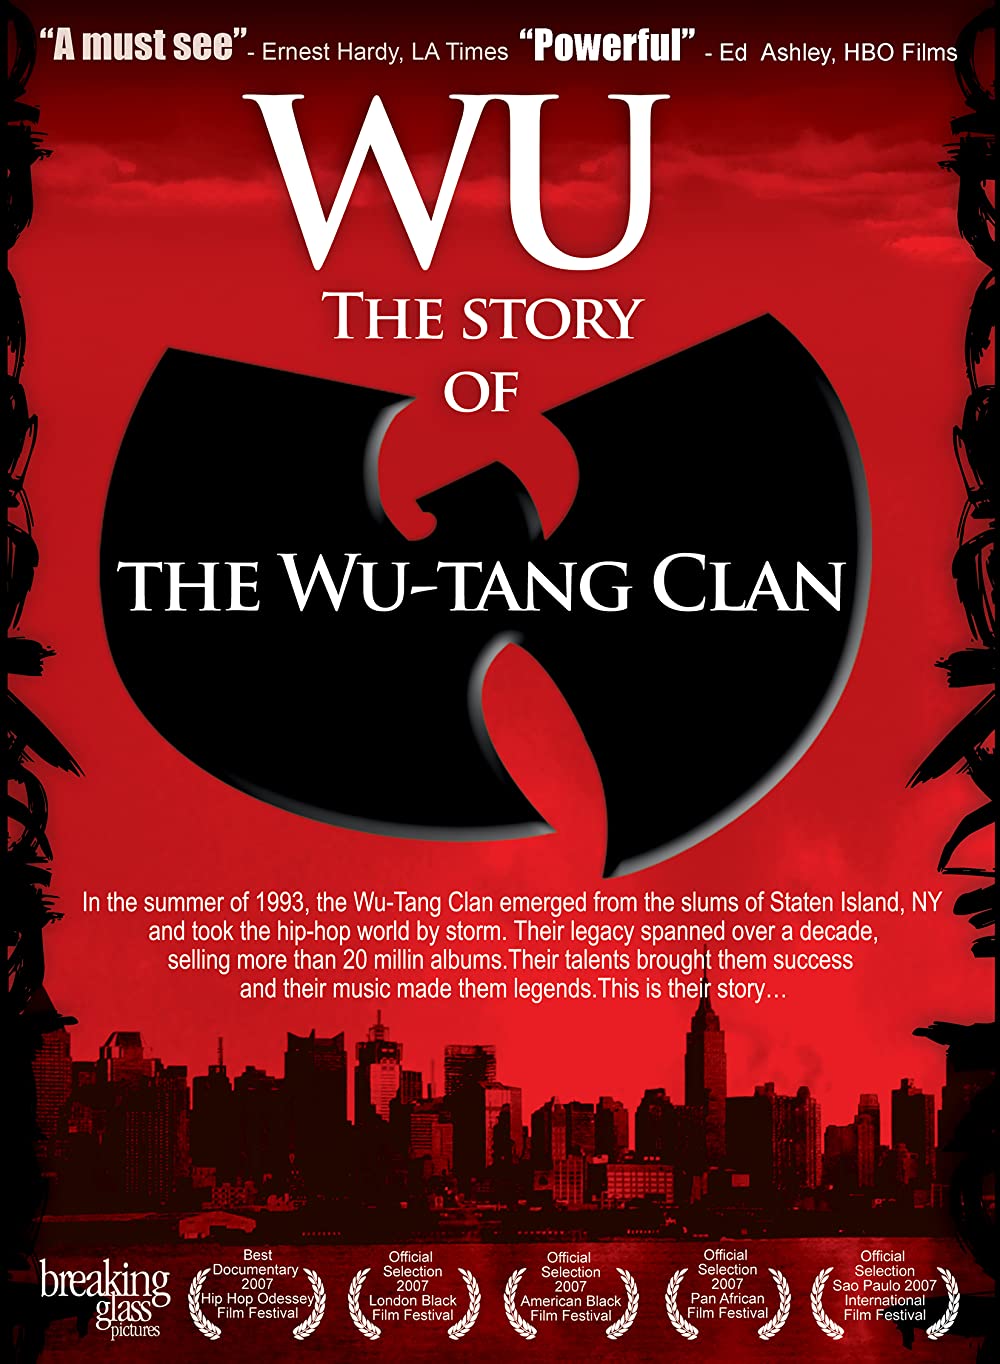 Download Wu: The Story of the Wu-Tang Clan Movie | Wu: The Story Of The Wu-tang Clan Full Movie